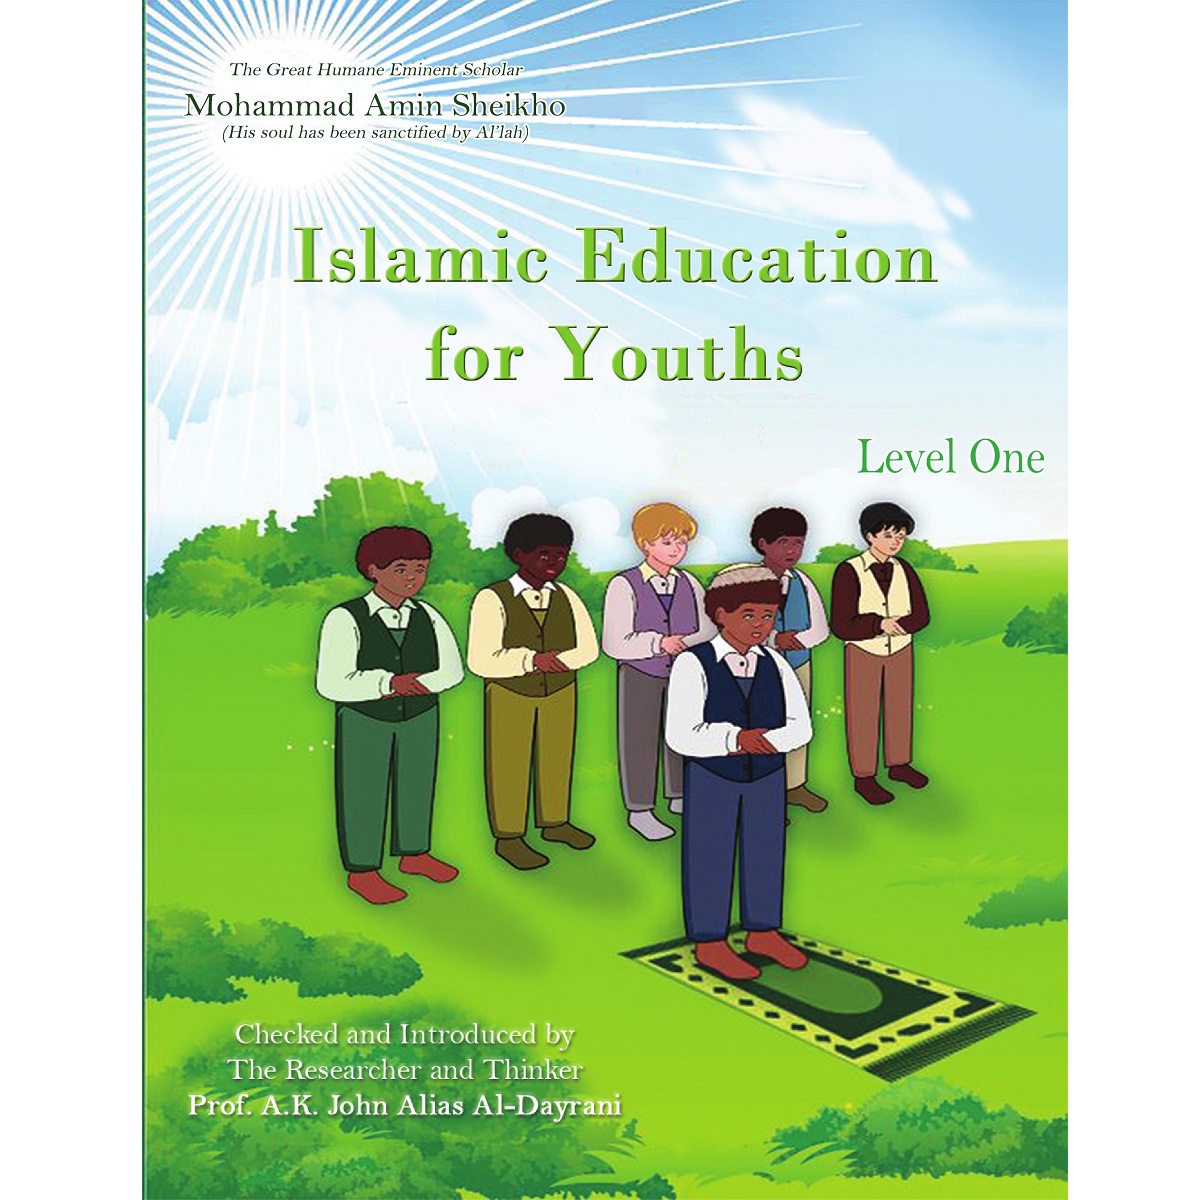 Islamic Education for Youths (Level One) By Mohammad Amin Sheikho